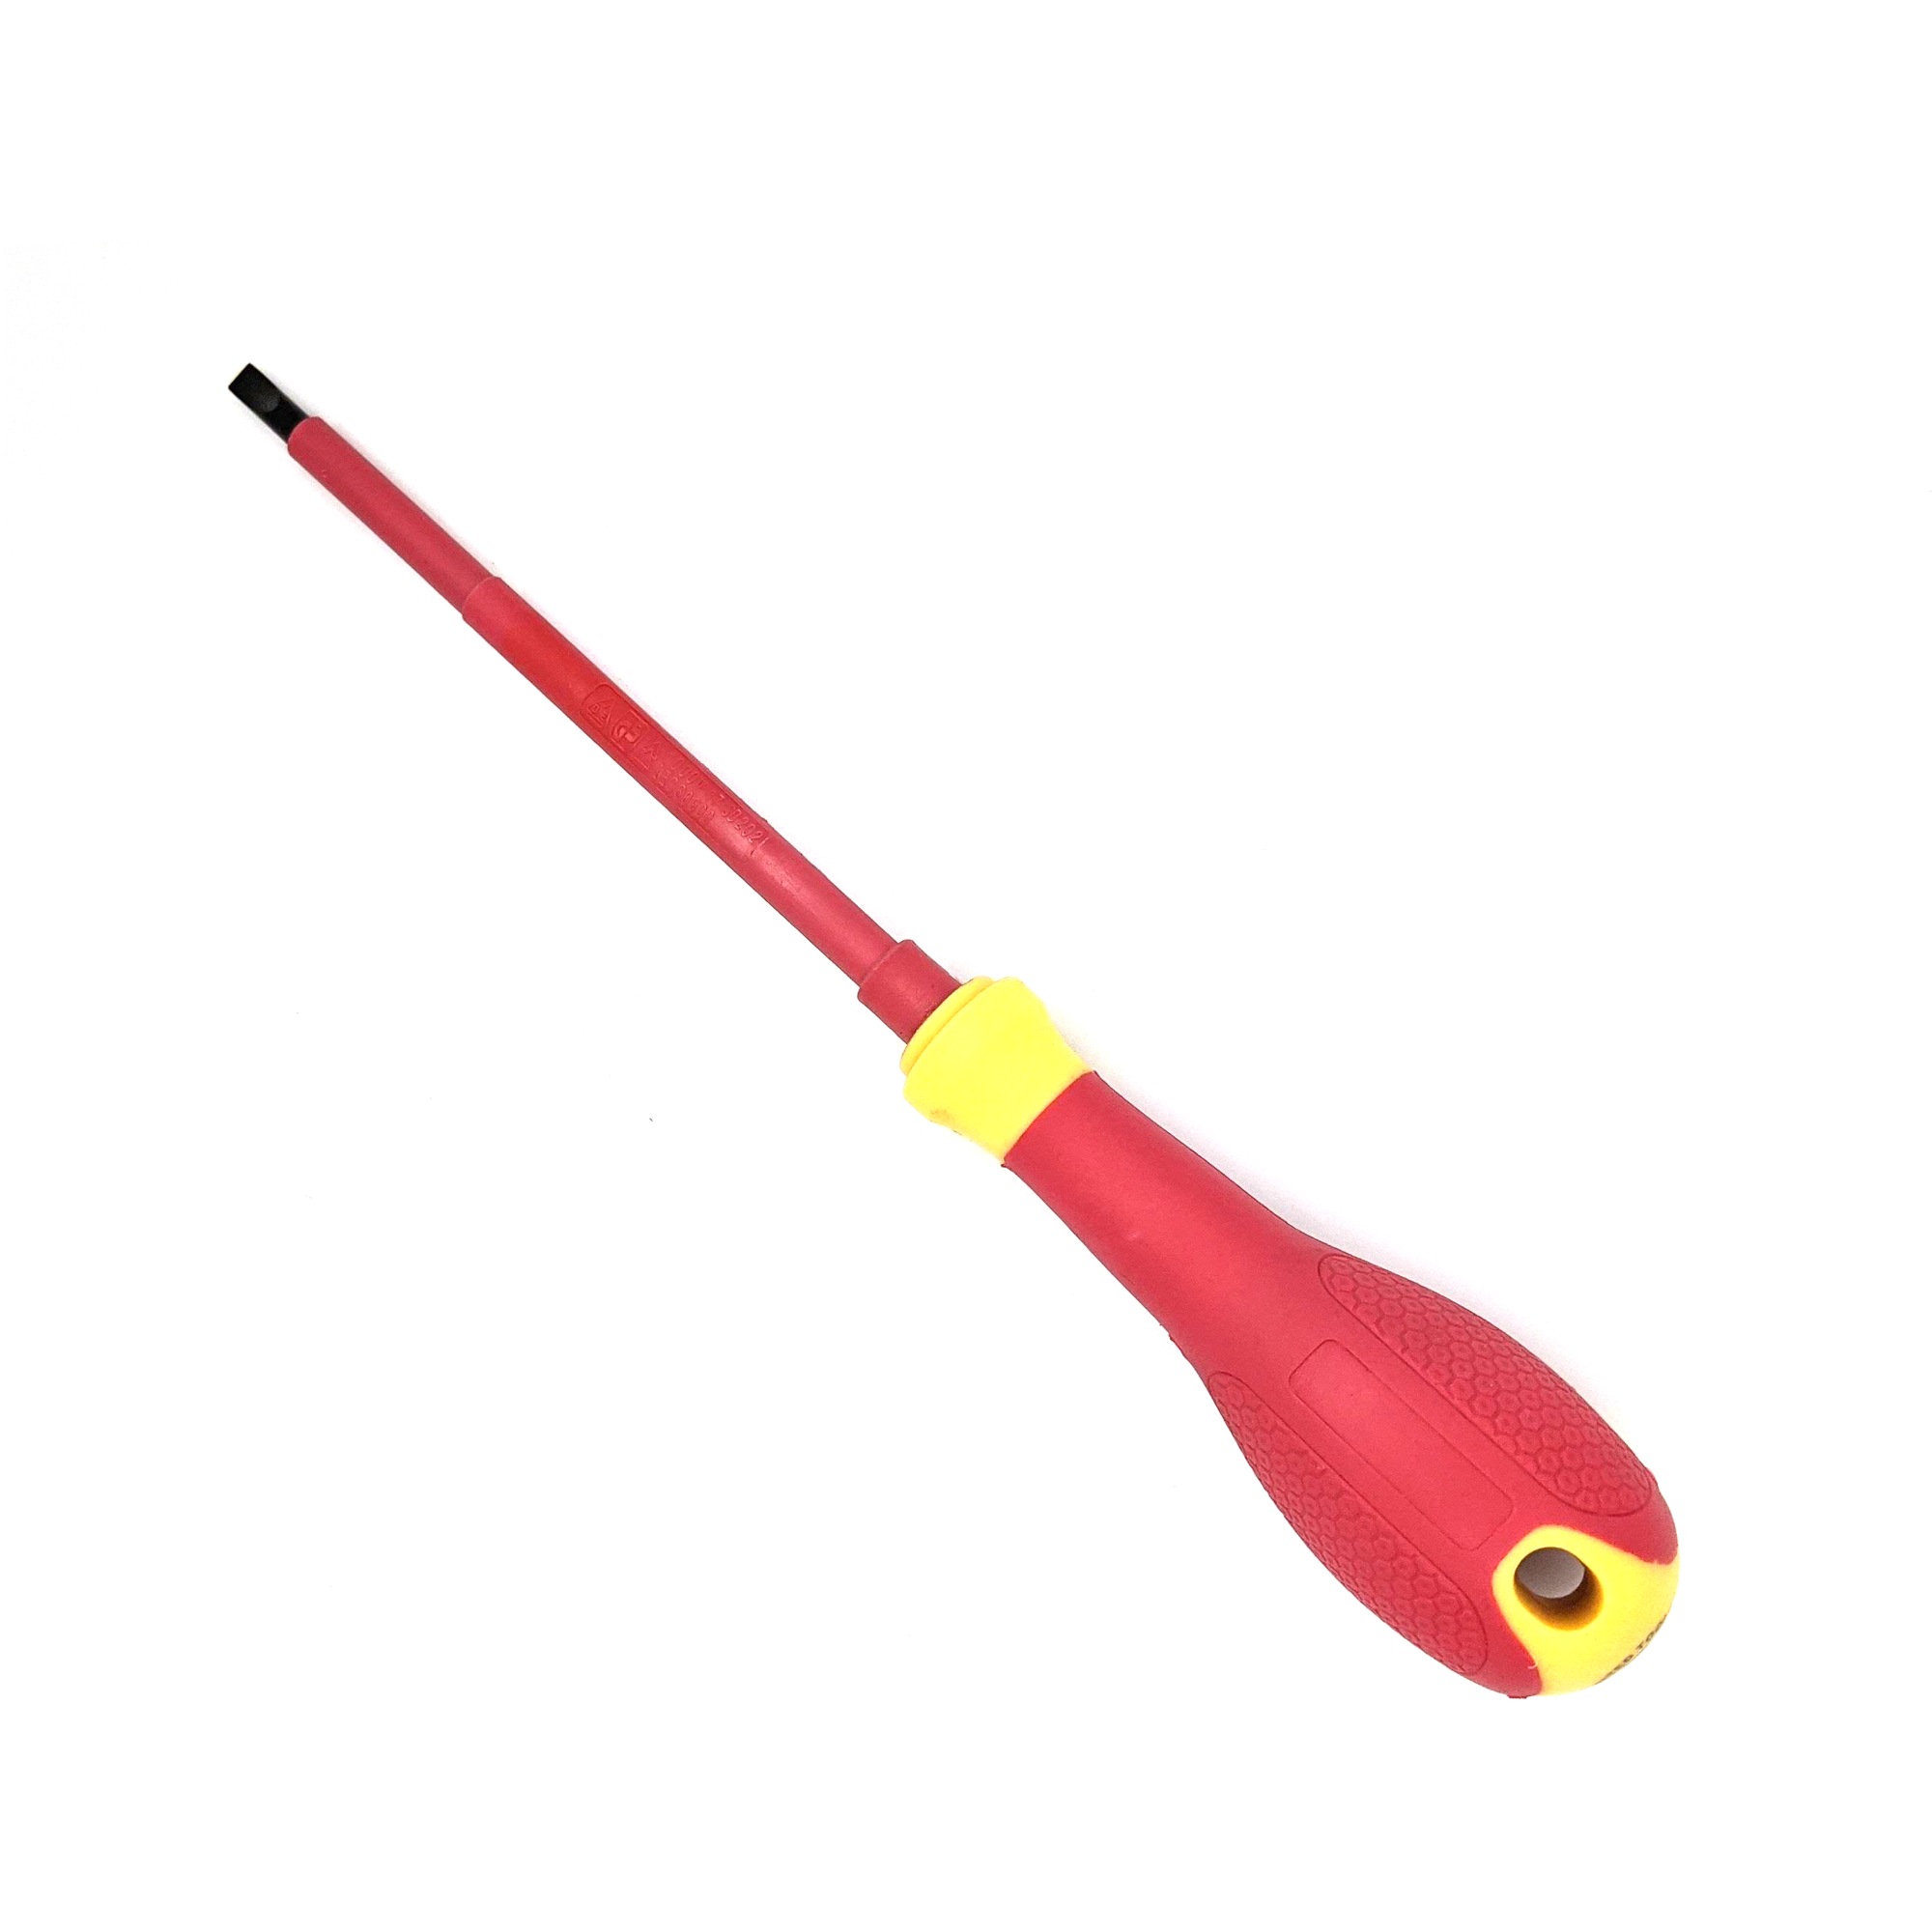 Workpro Vde Insulated Screwdriver 5.5X150Mm